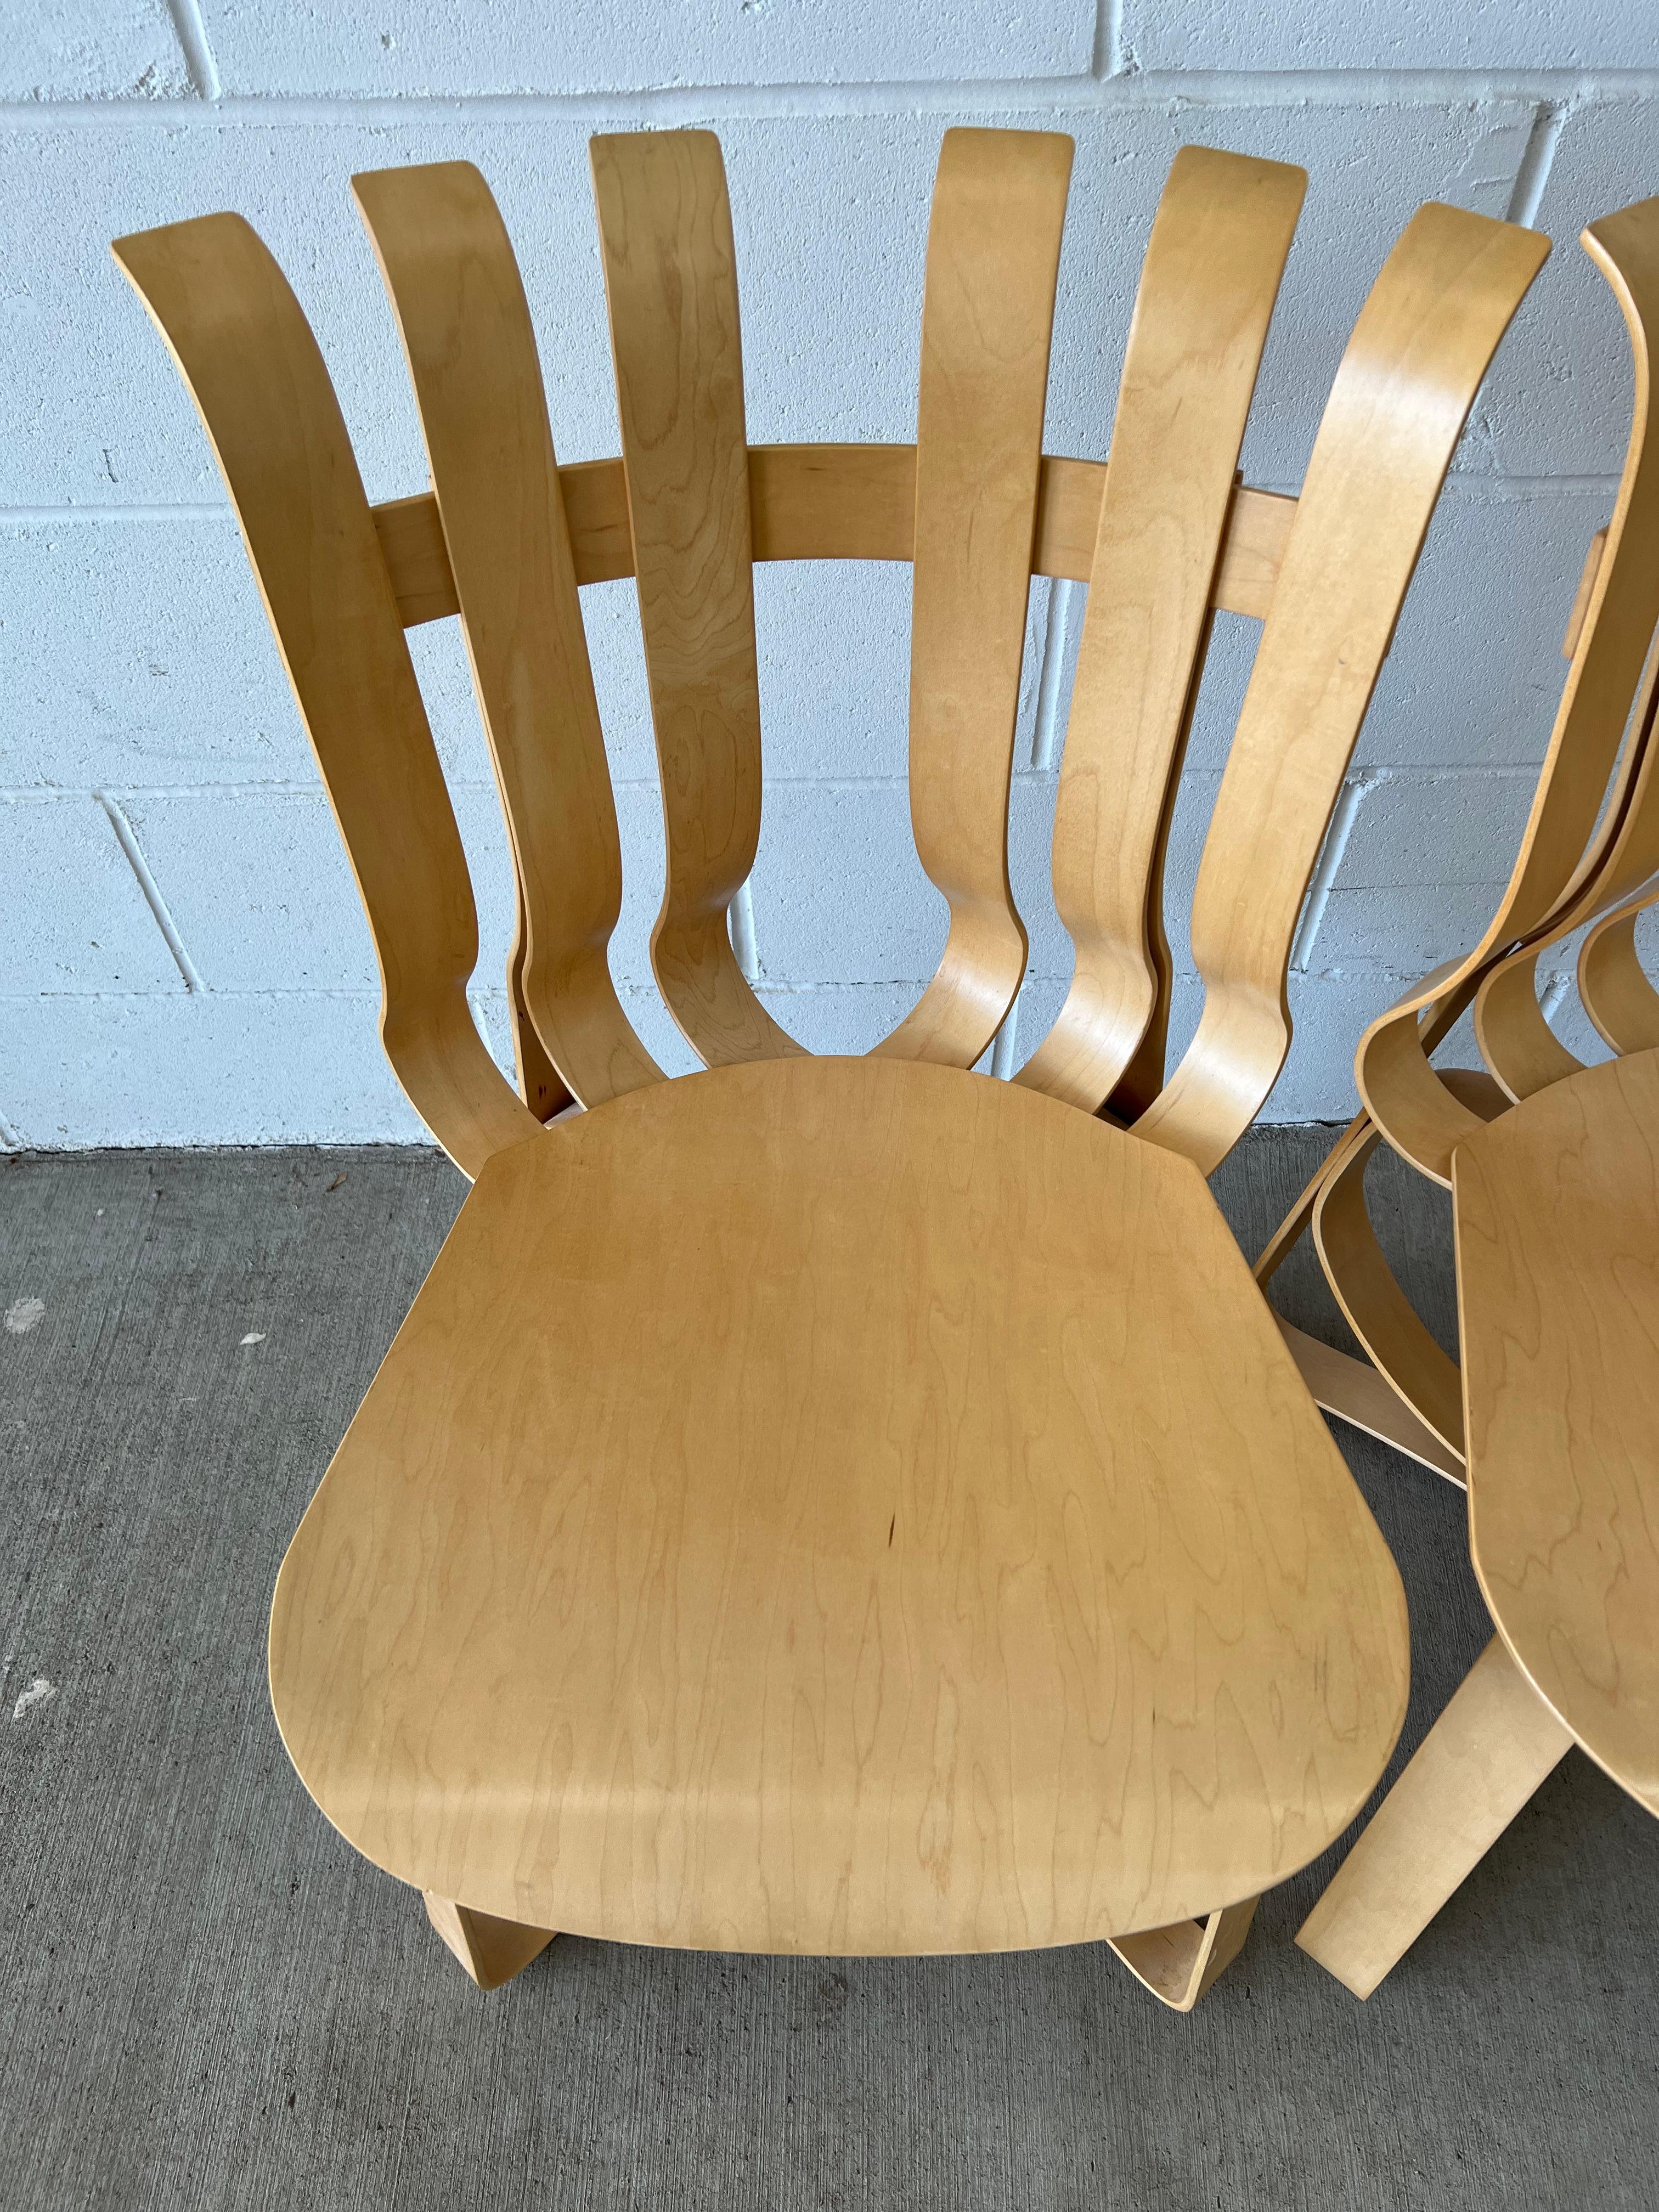 North American Hat Trick Chairs by Frank Gehry for Knoll, Set of 4